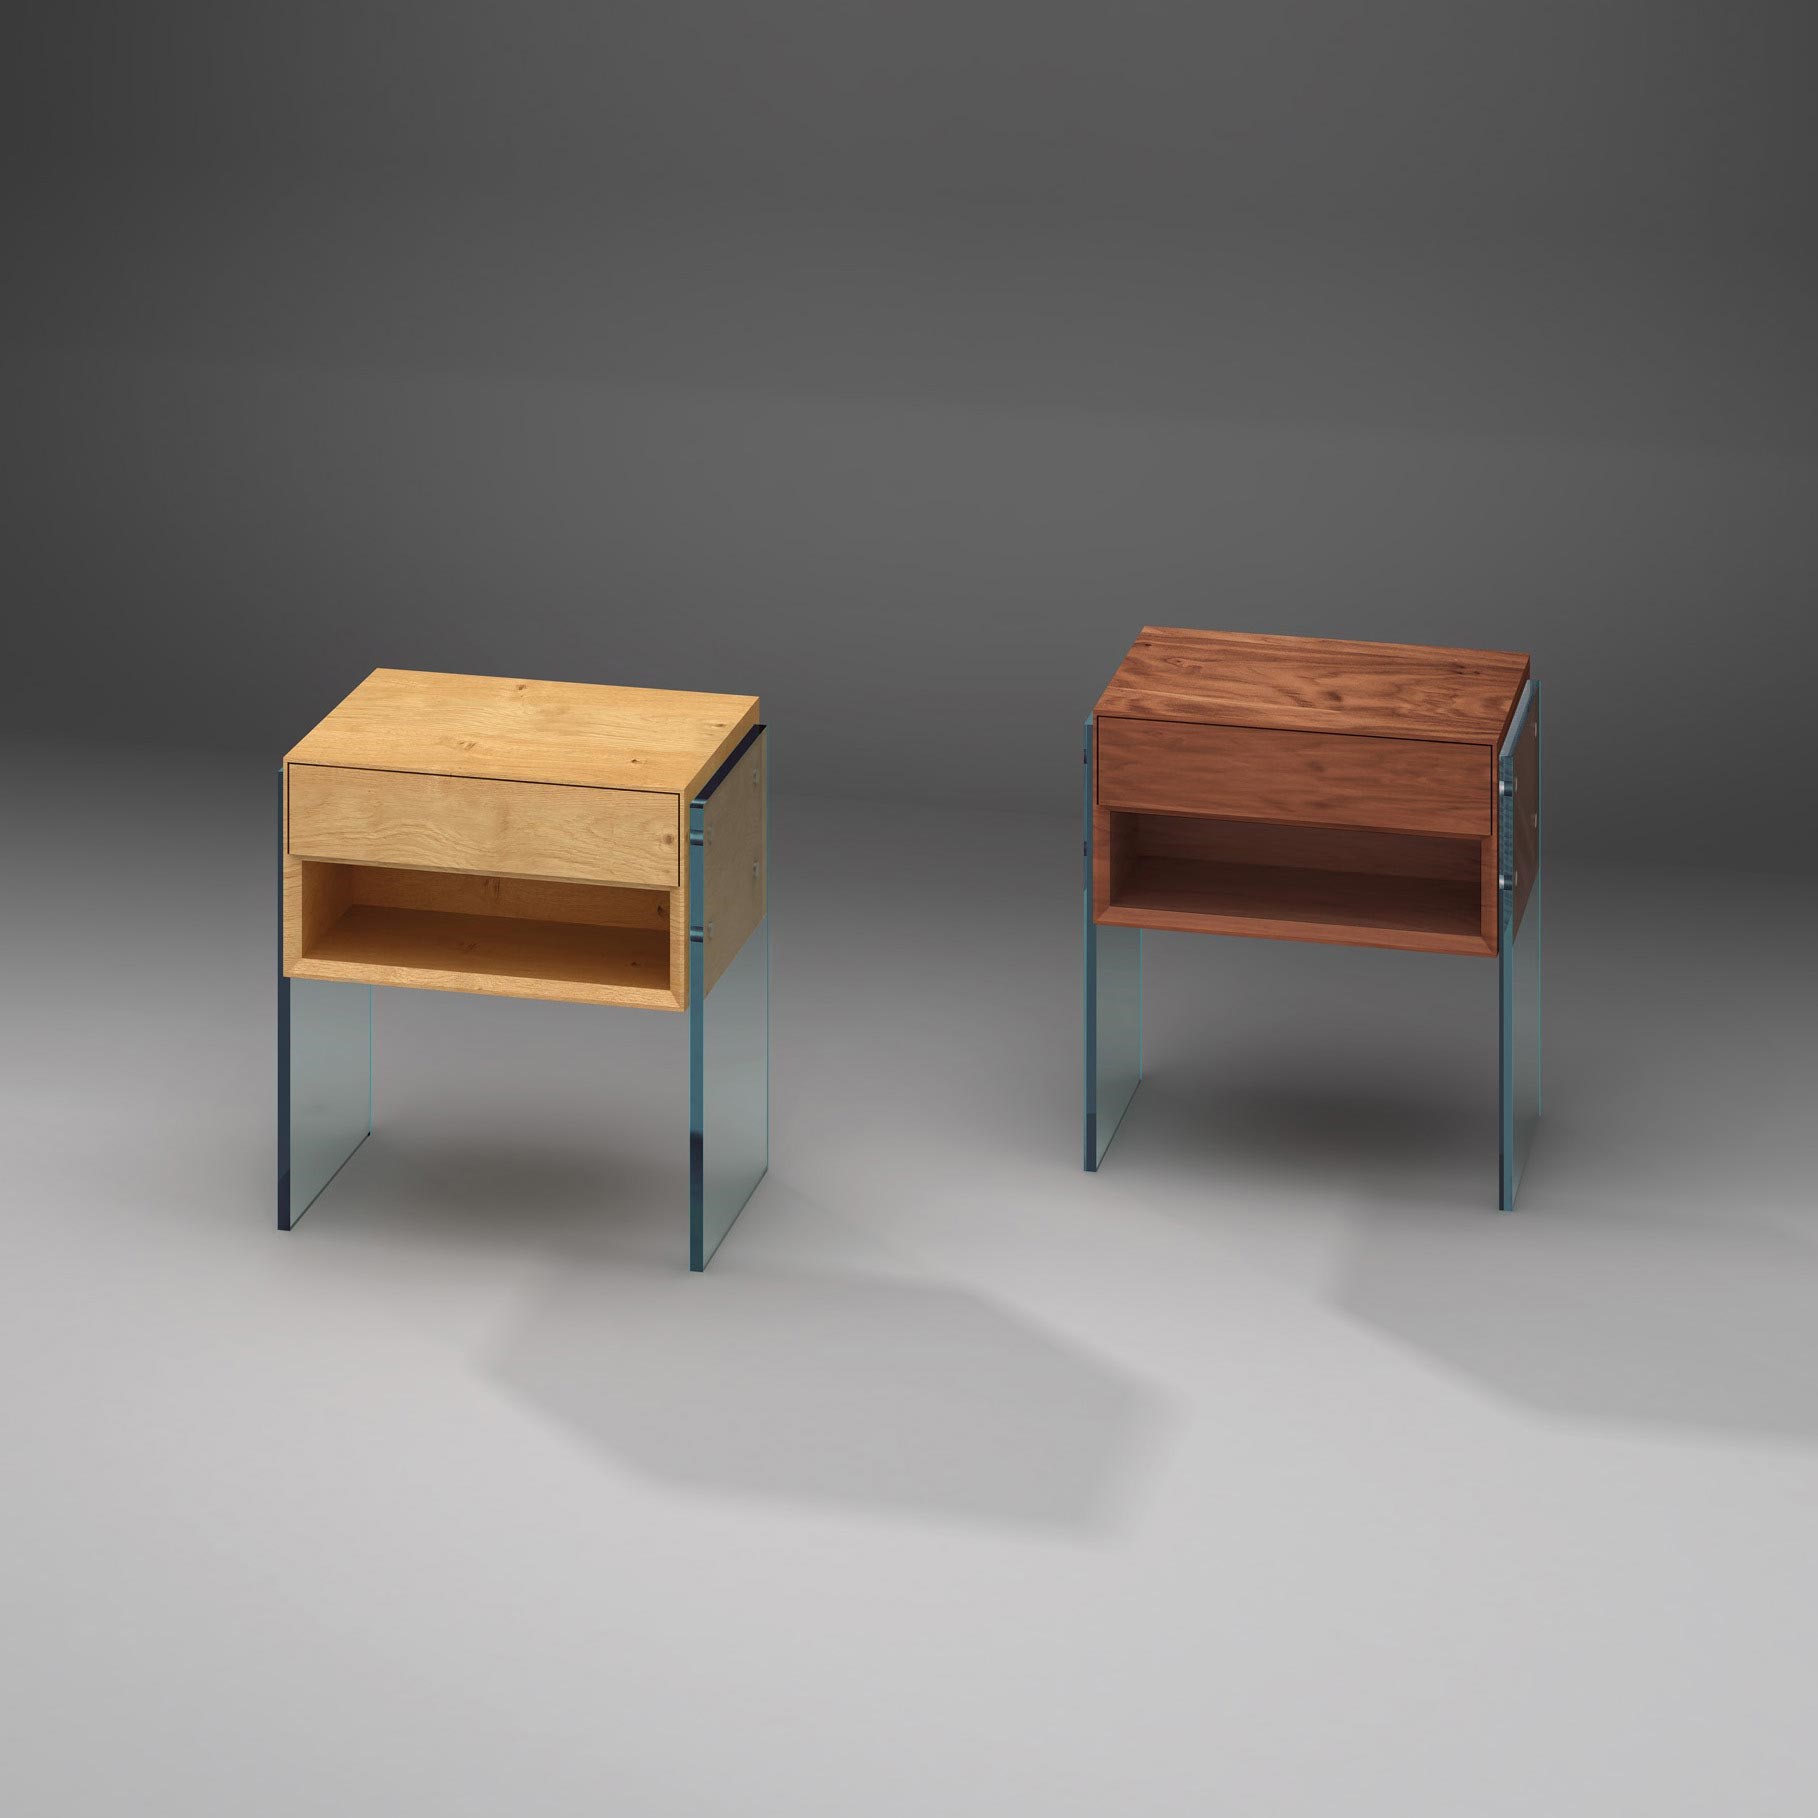 Solid wood nightstand FLAIR by DREIECK DESIGN: FLAIR 51 with 1 drawers - OPTIWHITE oak + walnut